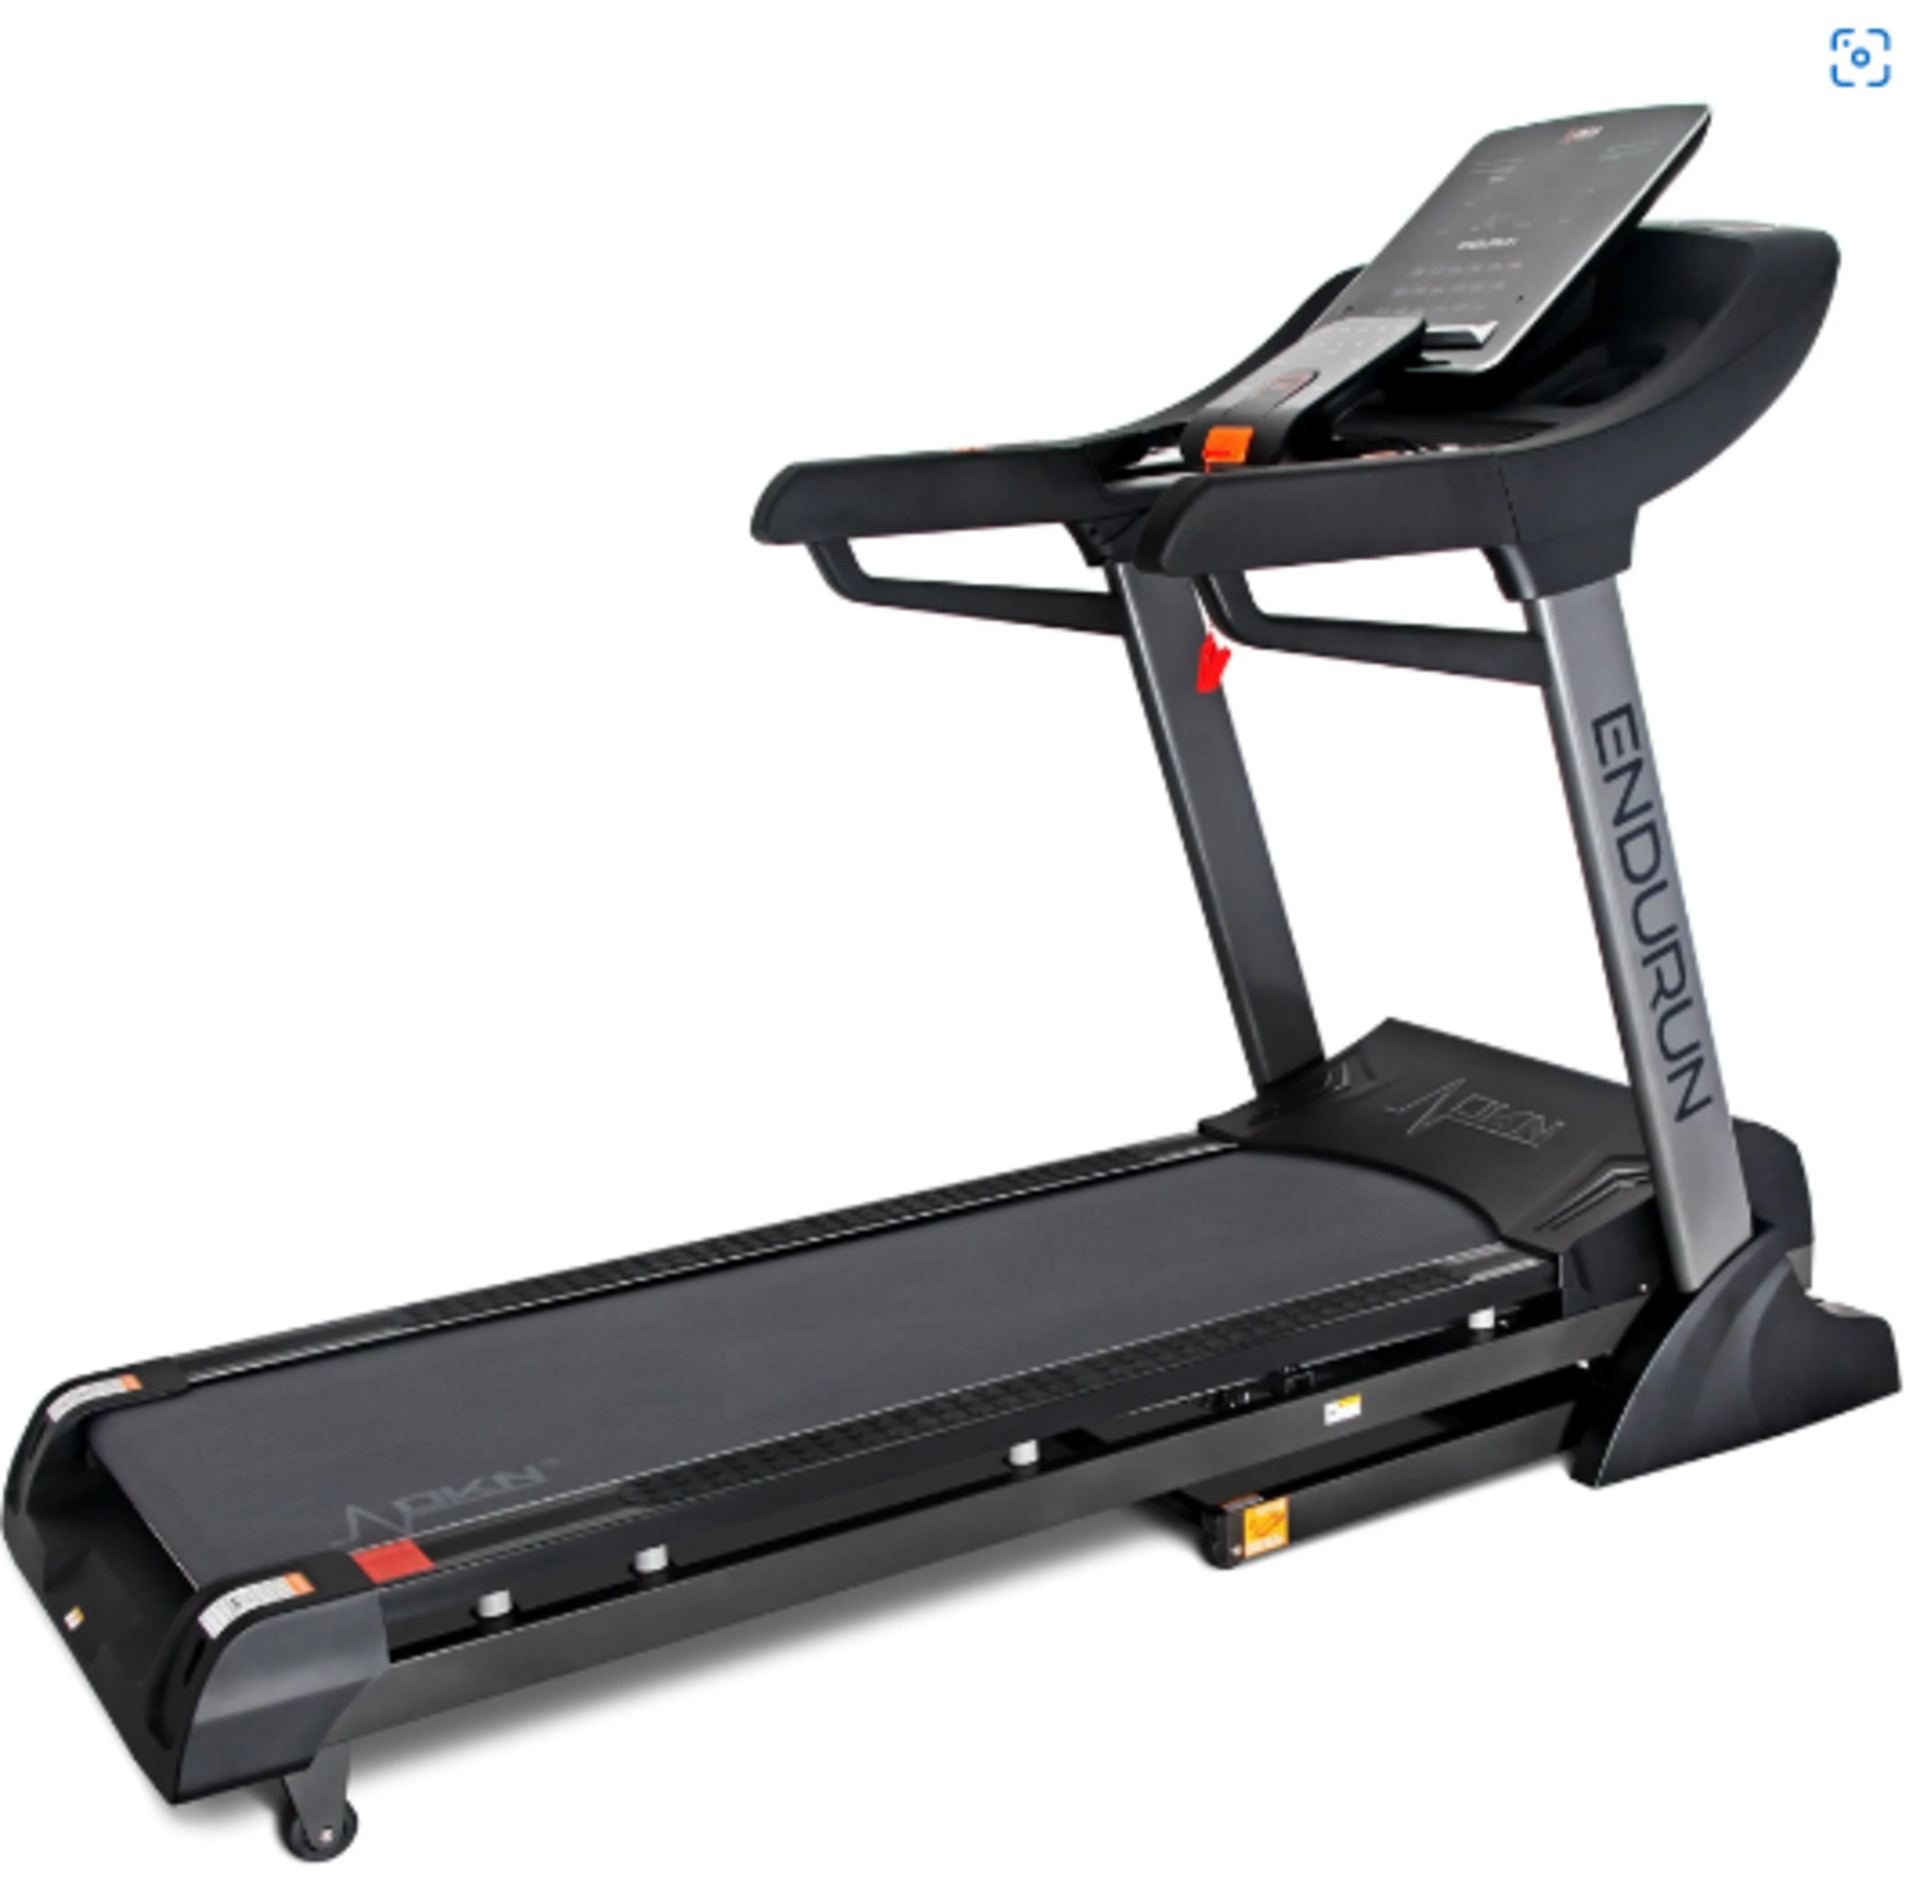 DNK - EnduRun Folding Treadmill - Unchecked & Boxed. - Viewing Recommended. RRP £1399.99